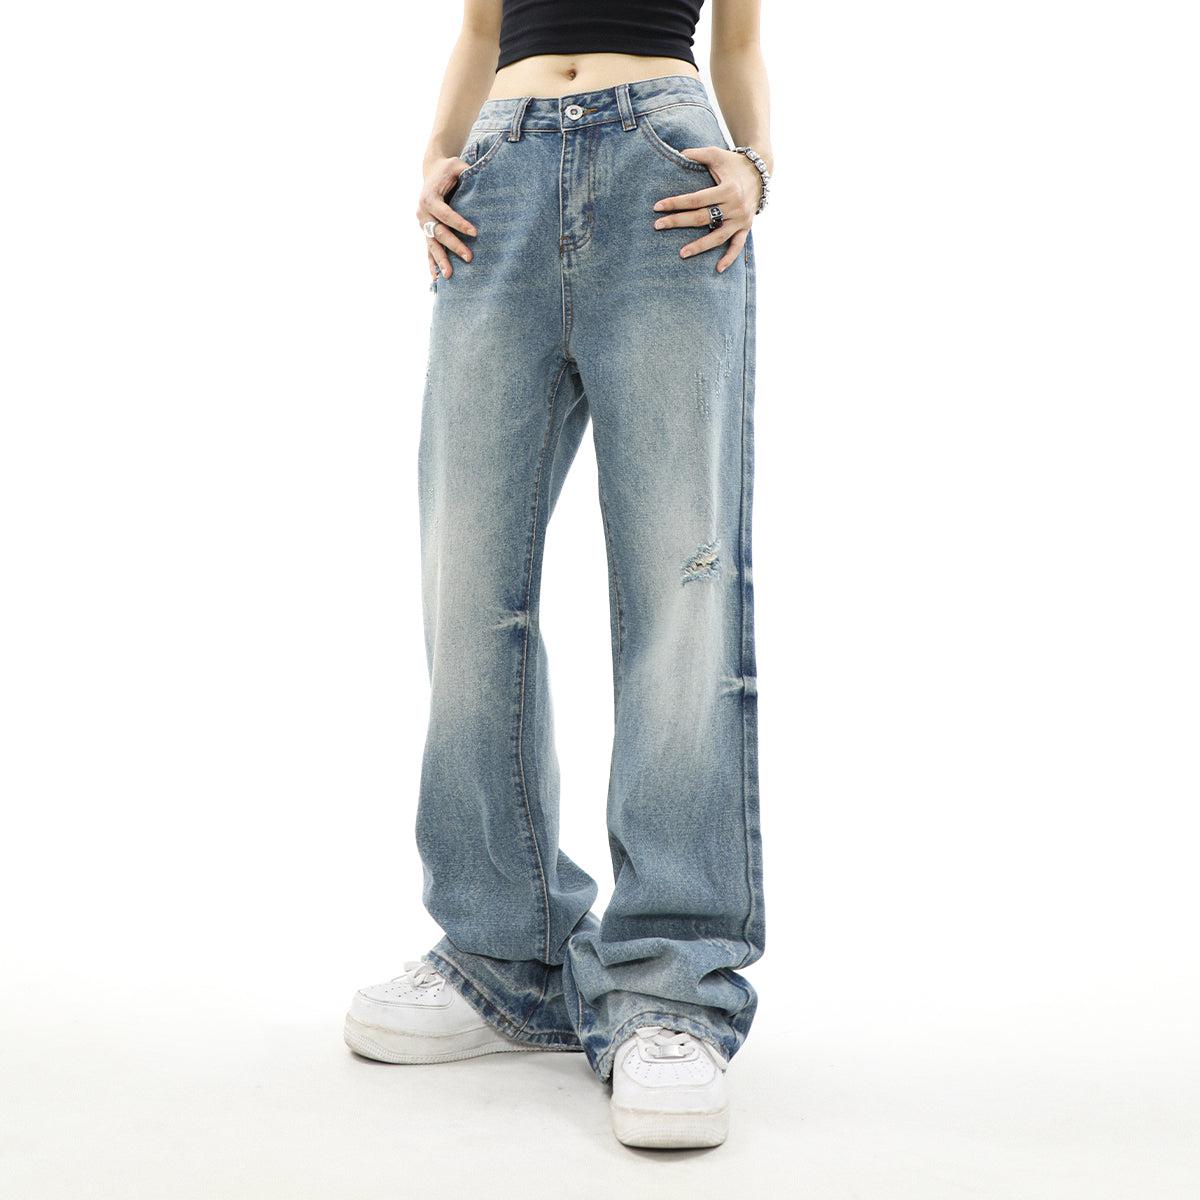 Washed Distressed Style Loose Jeans Korean Street Fashion Jeans By Mr Nearly Shop Online at OH Vault